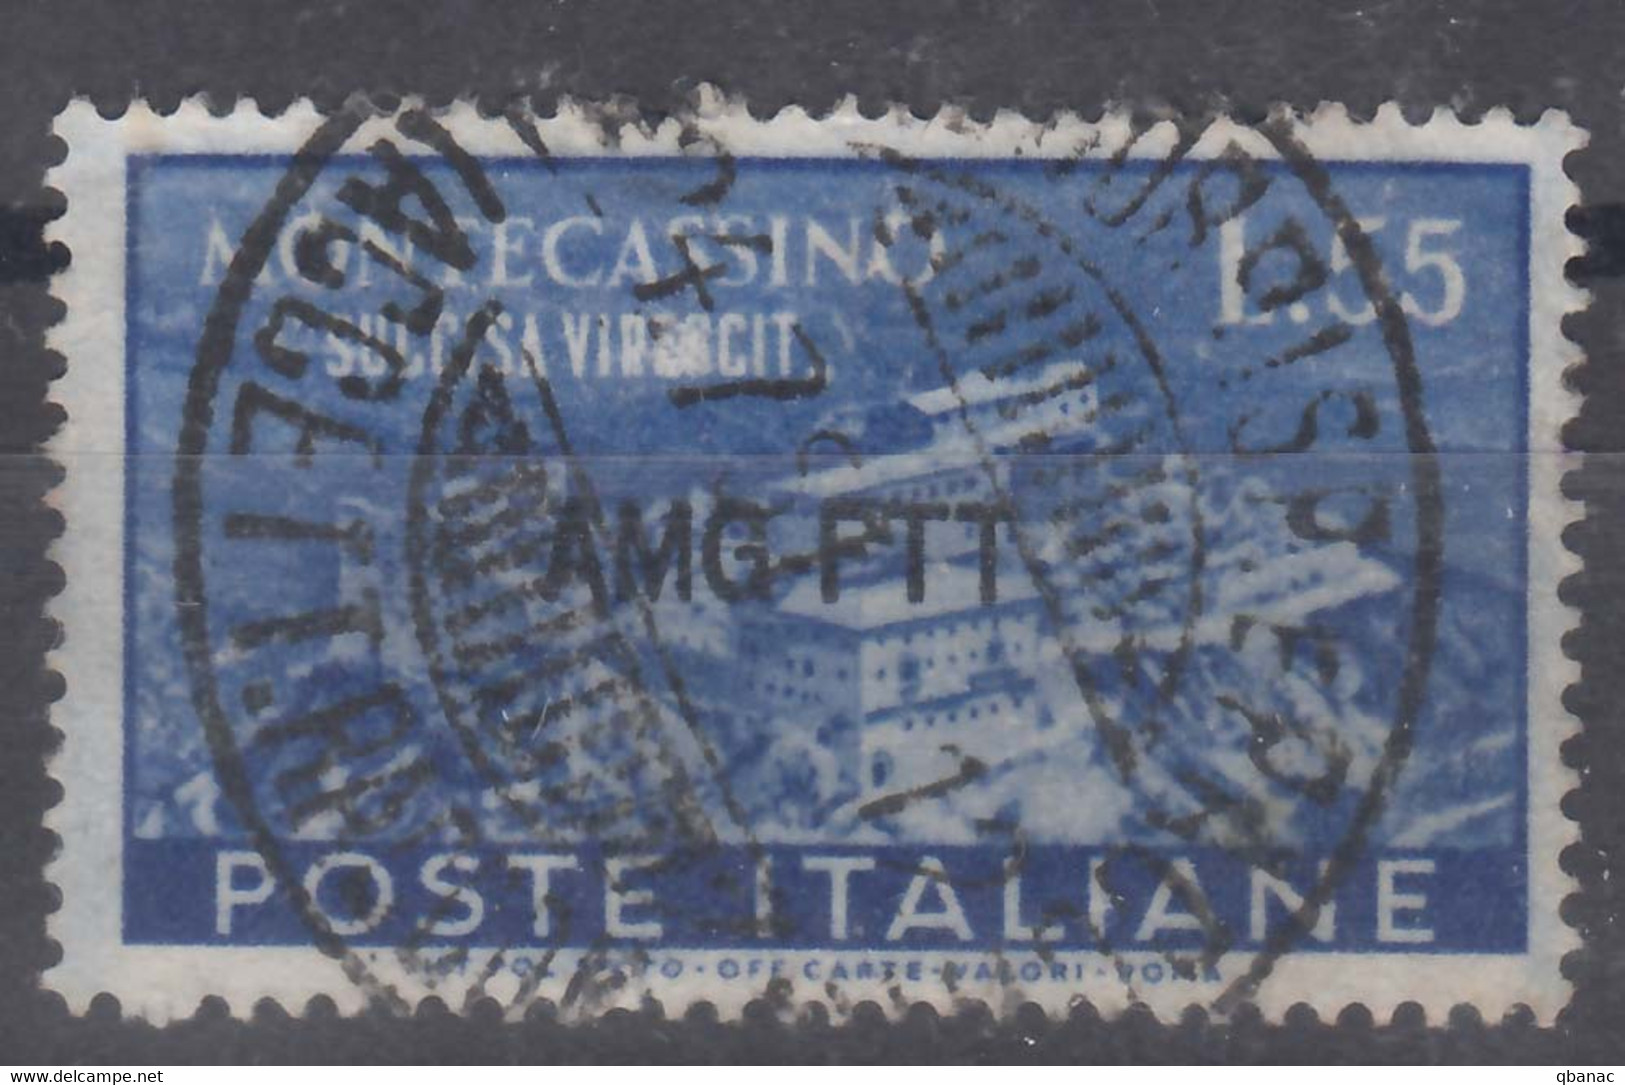 Italy Trieste Zone A AMG-FTT 1952 Mi#151 Used - Afgestempeld